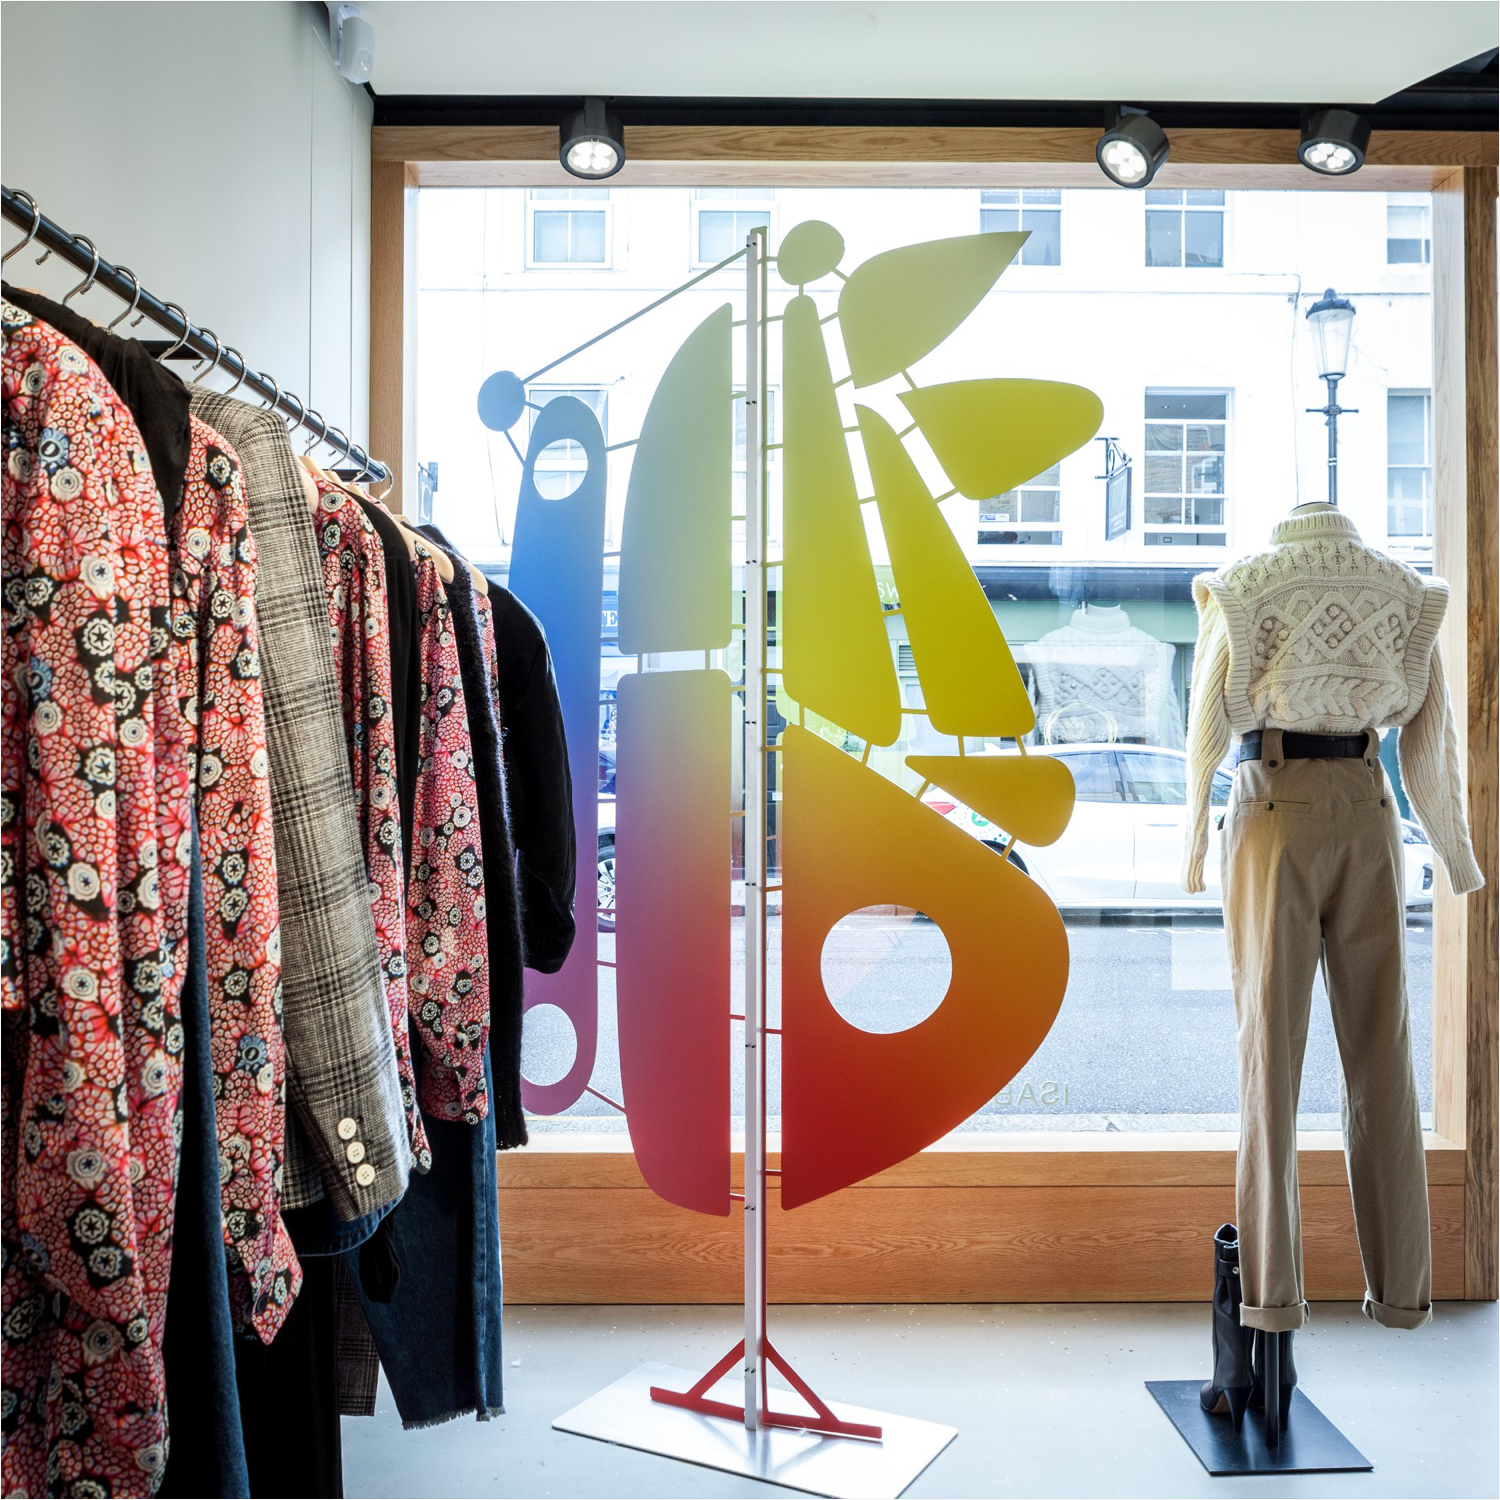 London: Isabel opening – superfuture®